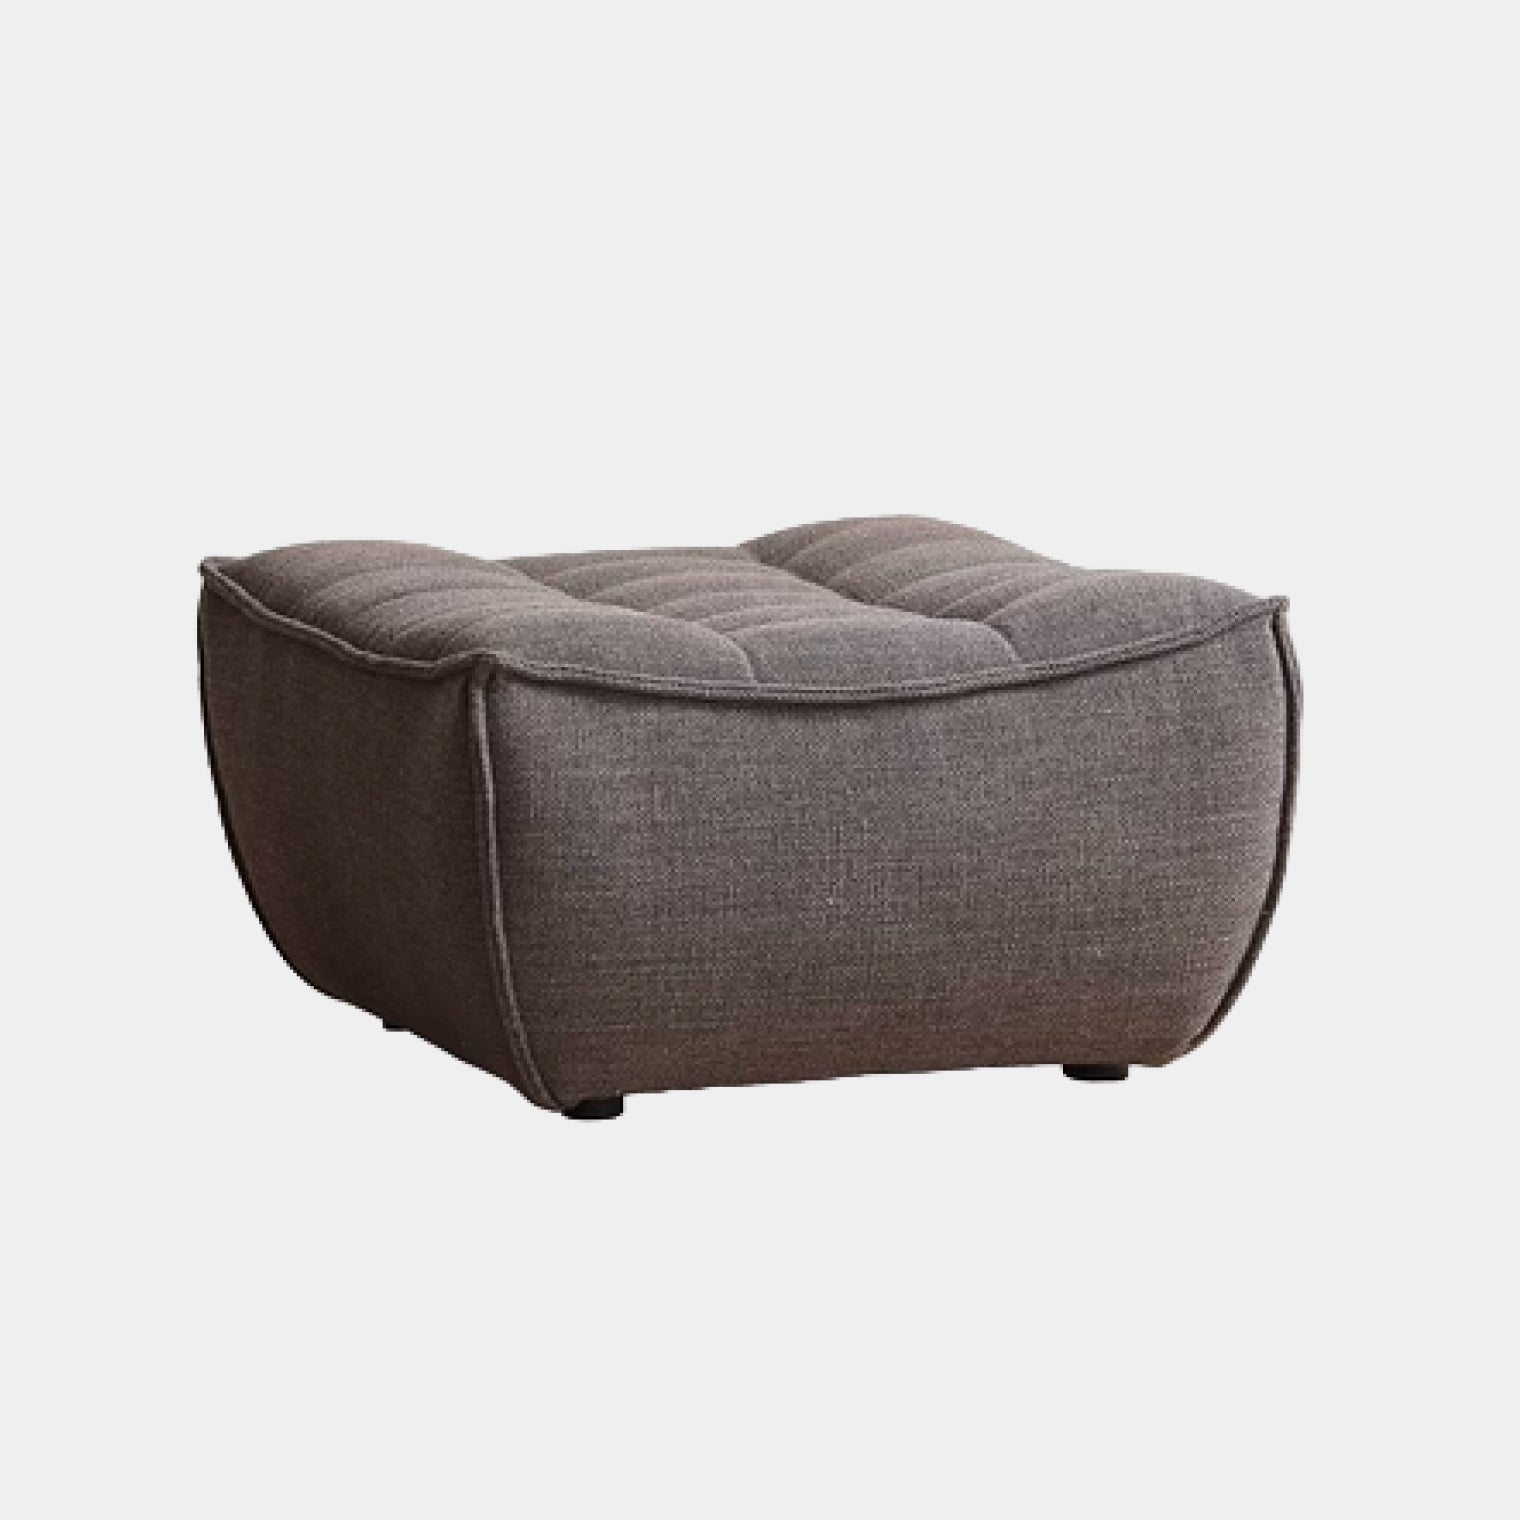 Amber Armless 1 Seater, Grey